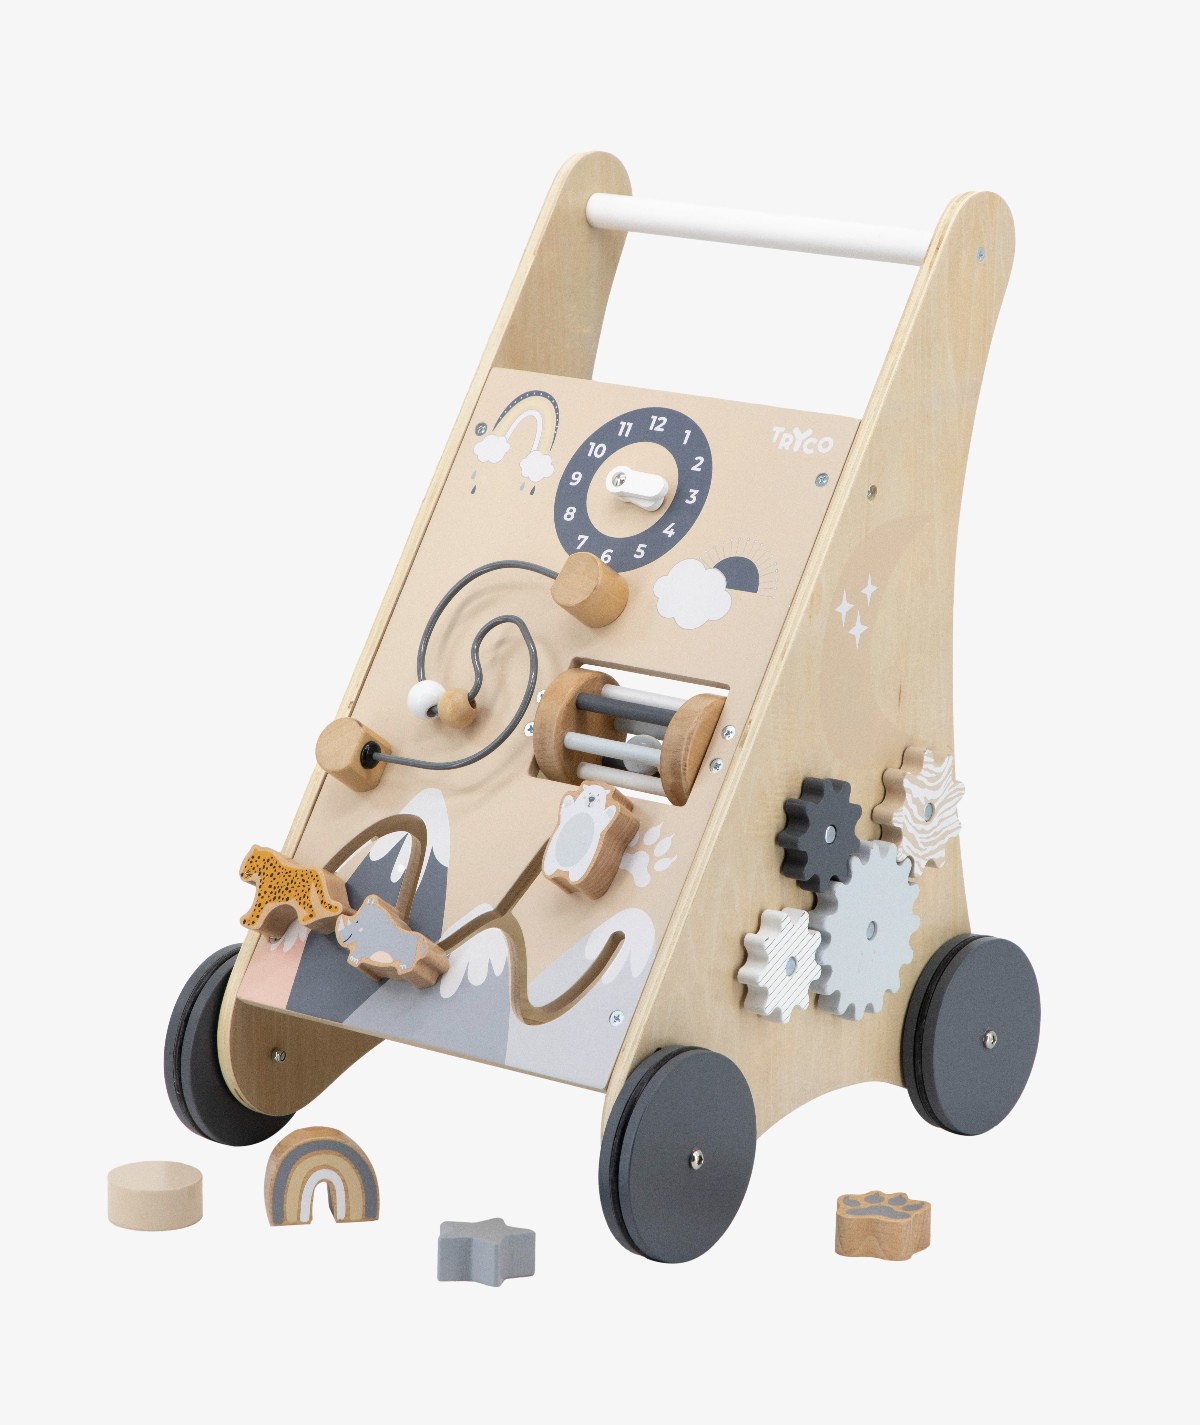 How to Care for Your Baby's Wooden Toys